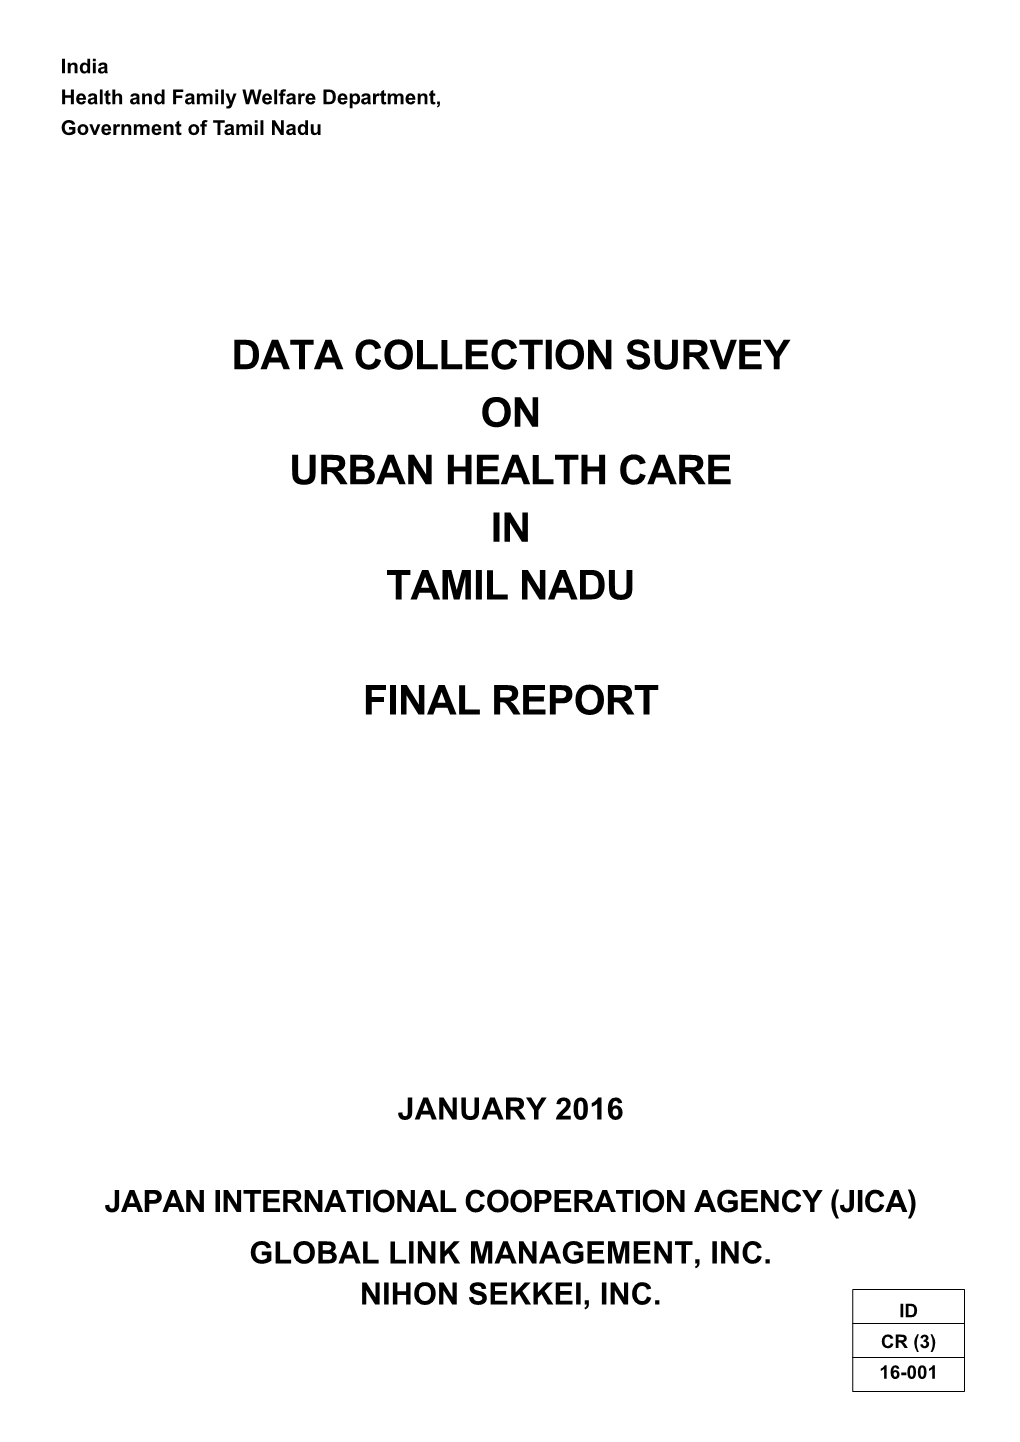 Data Collection Survey on Urban Health Care in Tamil Nadu Final Report